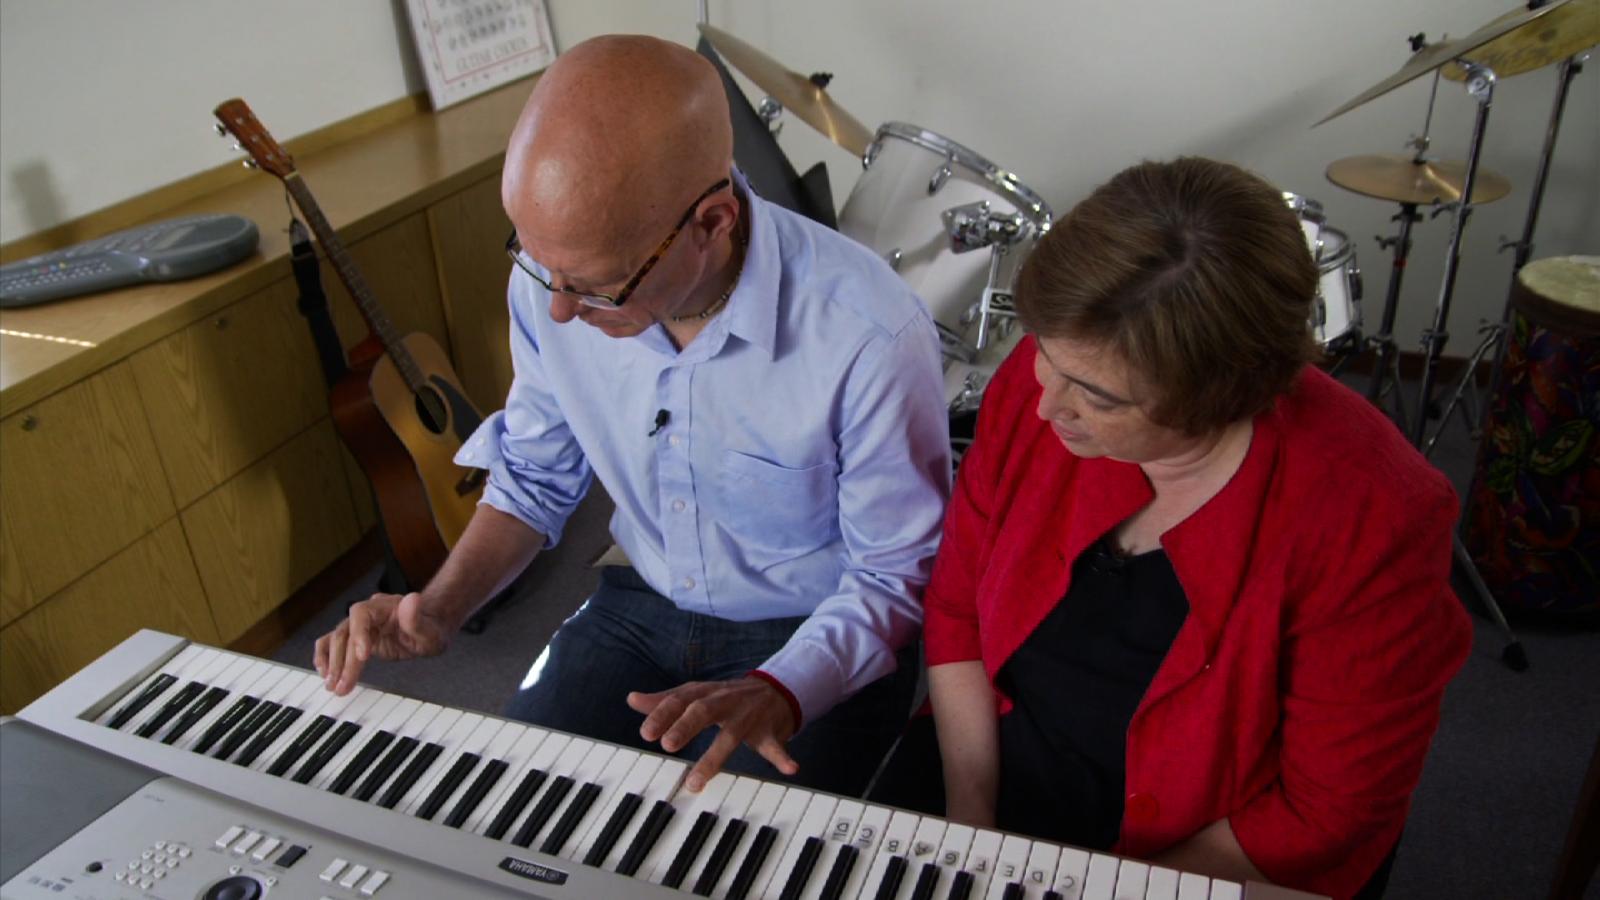 man plays keyboard with music therapist